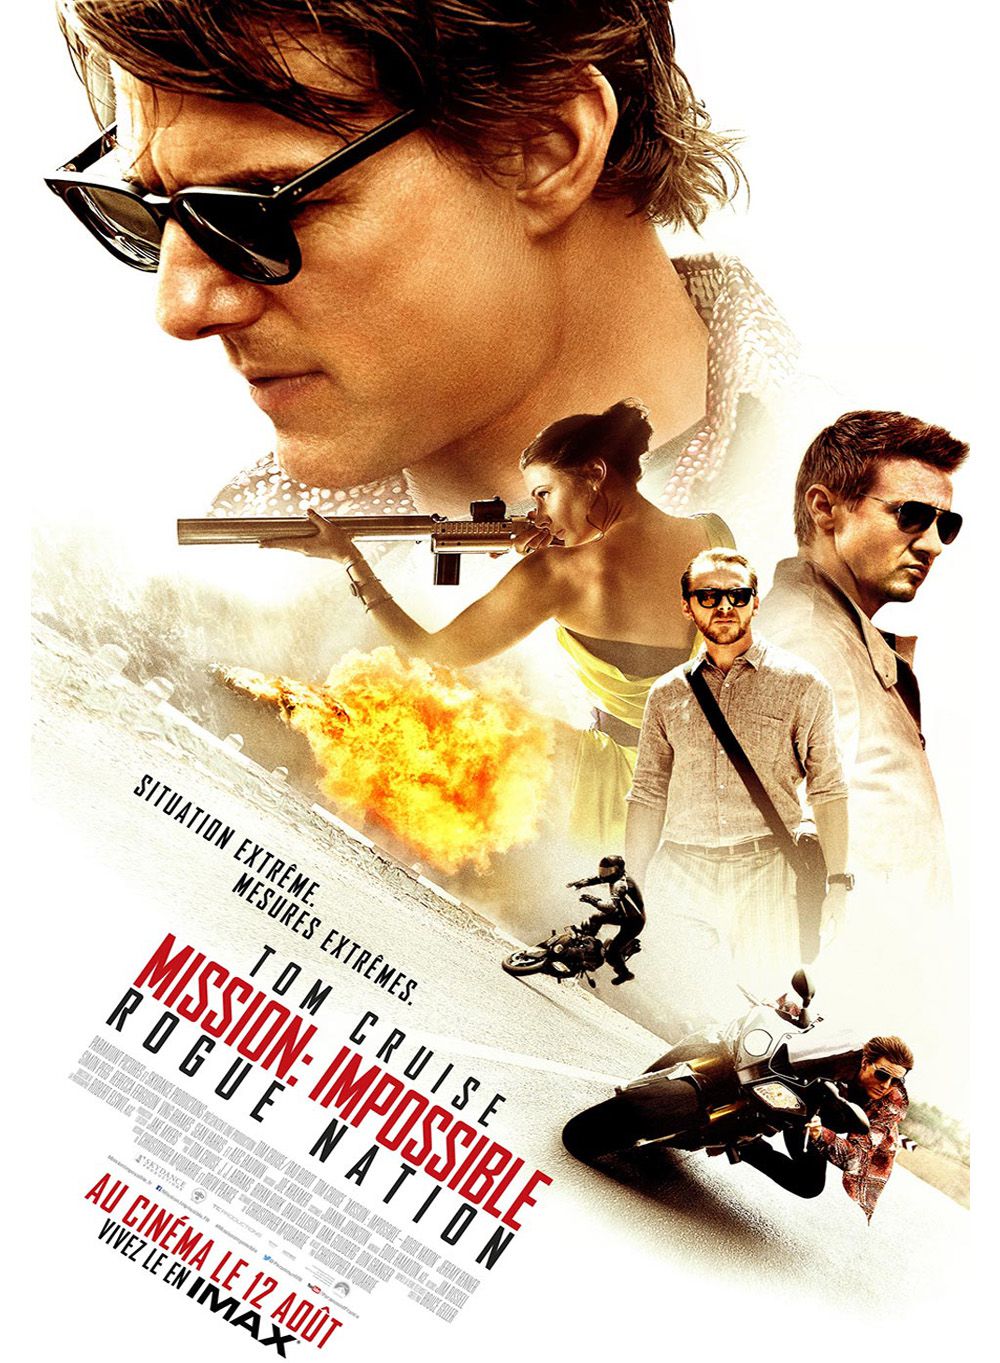 Mission : Impossible - Rogue Nation - Film (2015) streaming VF gratuit complet